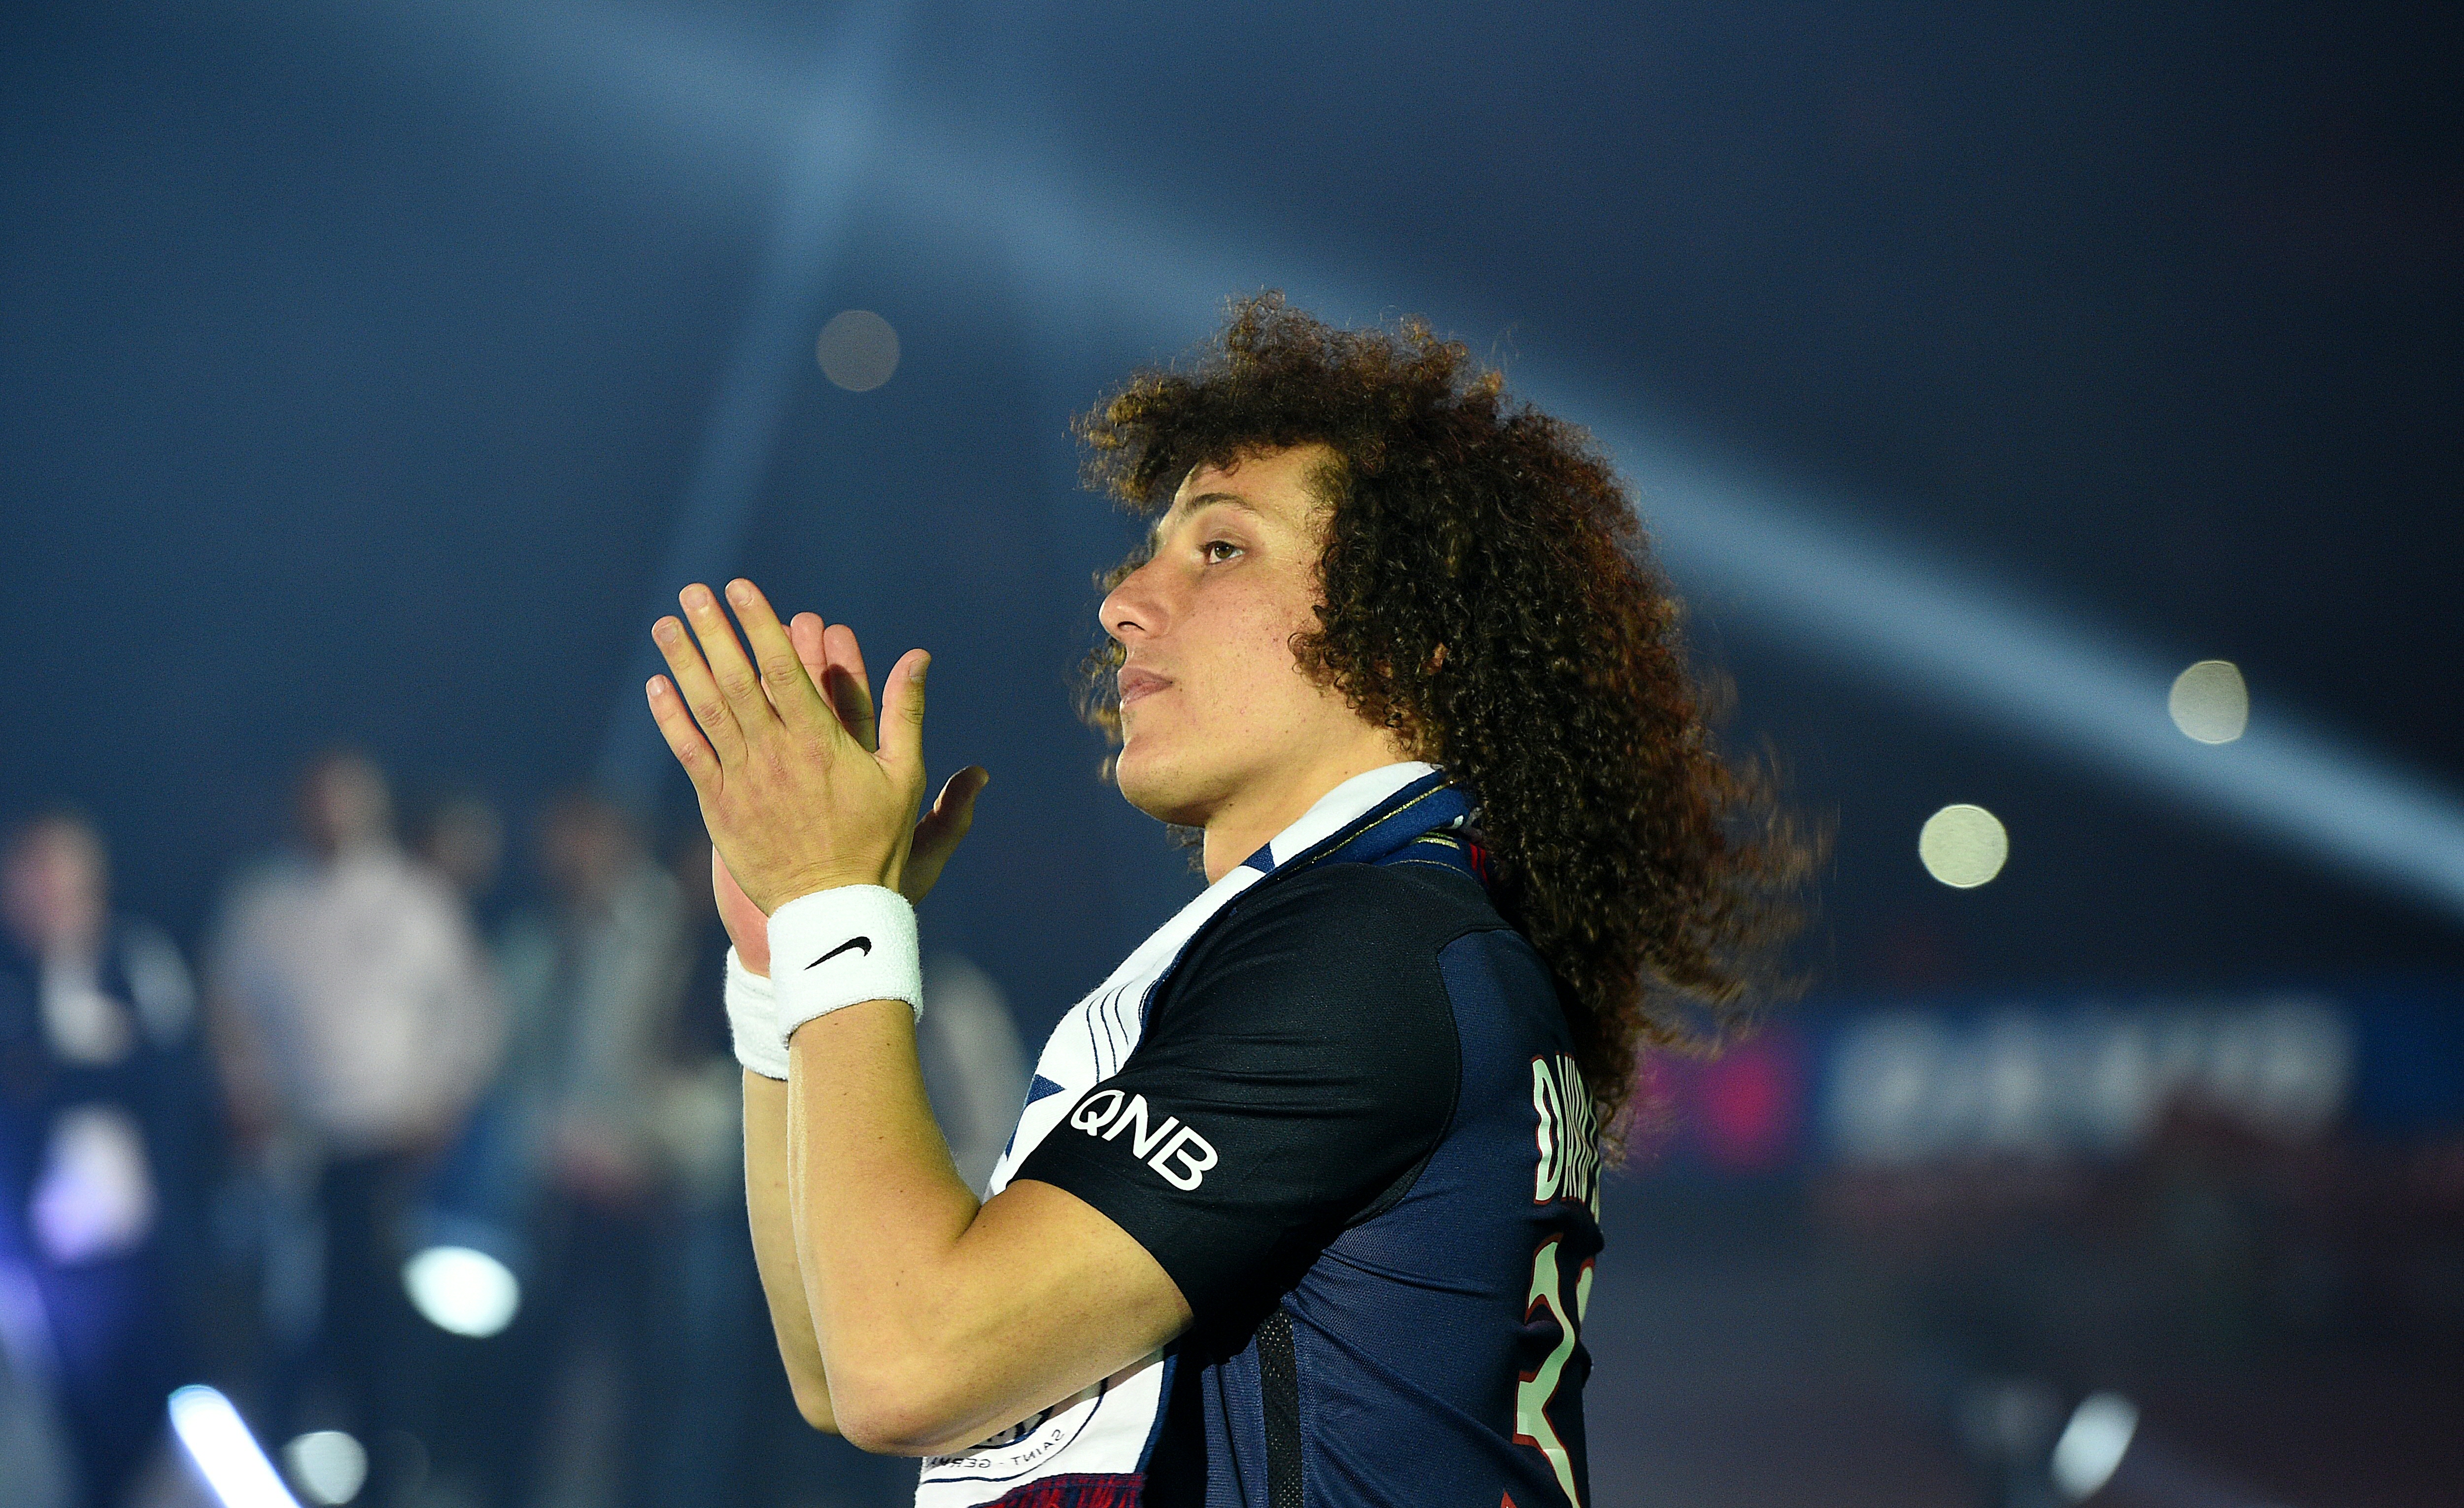 (FILES) This file photo taken on May 14, 2016 shows Paris Saint-Germain's Brazilian defender David Luiz reacting at the end of  the French L1 football match between Paris Saint-Germain and Nantes at the Parc des Princes stadium in Paris. Brazilian international defender David Luiz signed for Chelsea for a second time on August 31, 2016. / AFP PHOTO / FRANCK FIFE